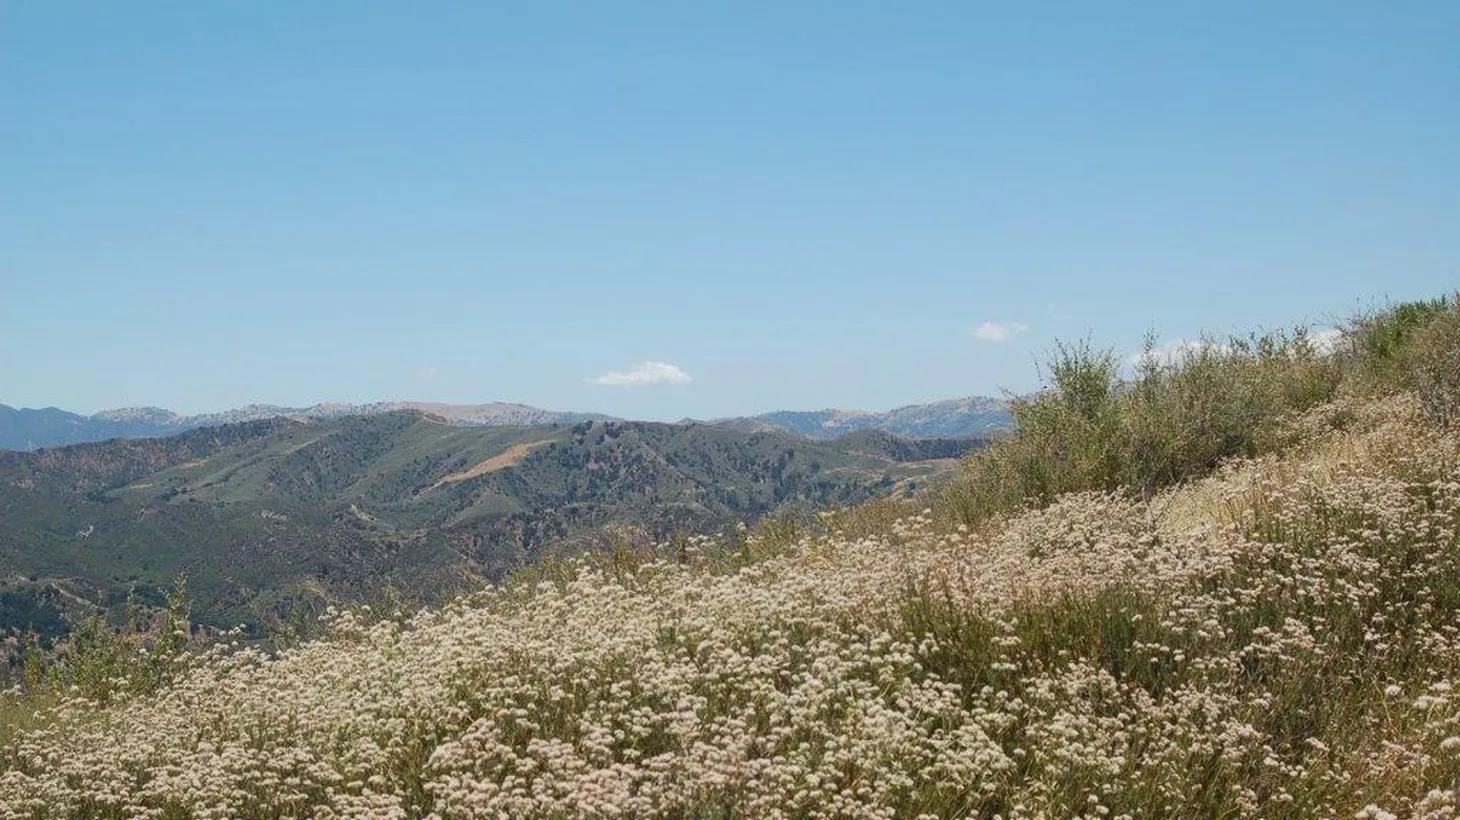 LA County has completed the acquisition of 6,000 acres of land on the Hathaway/Temescal Ranch west of the 5 freeway that will be preserved as open space, particularly for hikers.